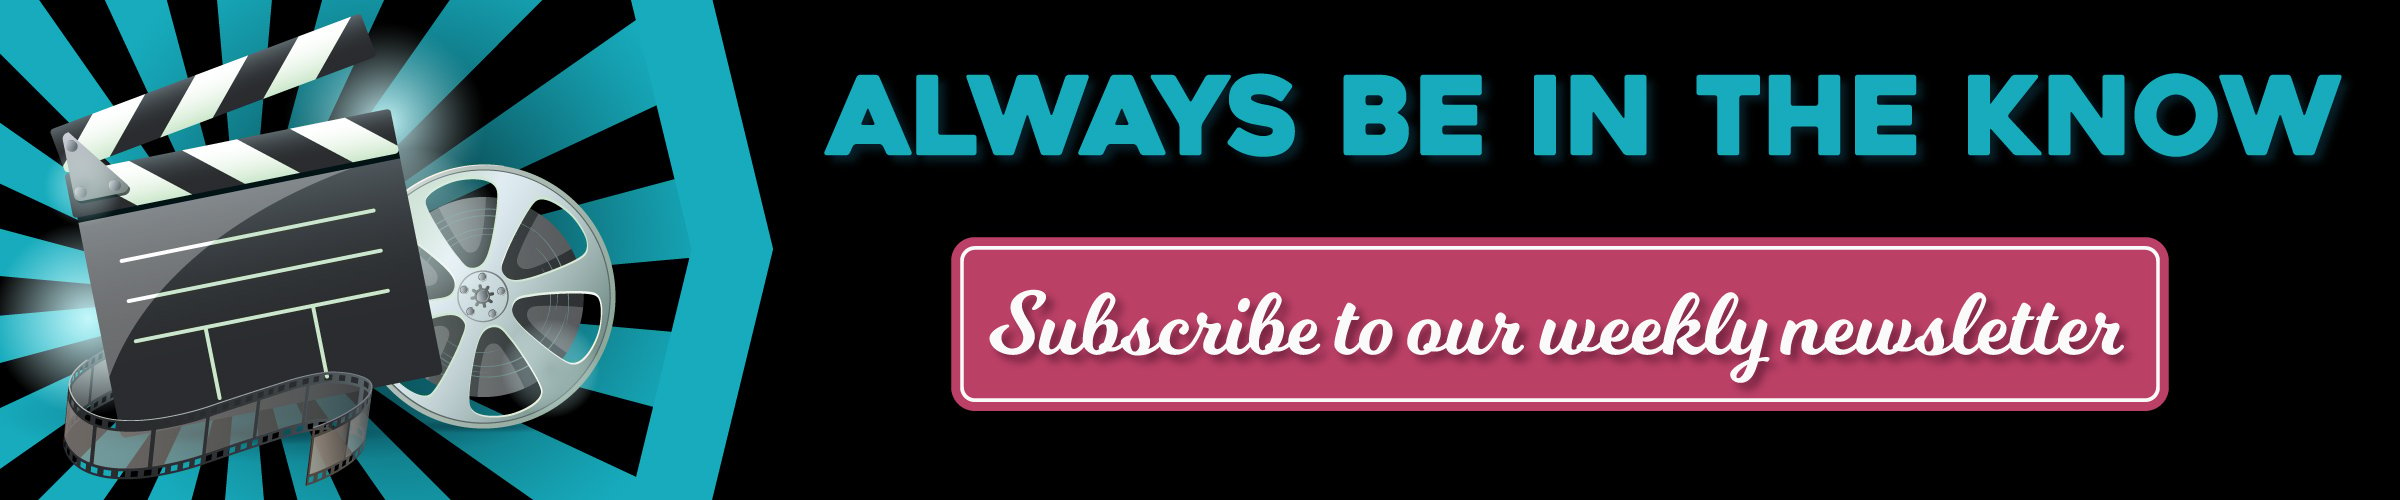 subscribe to our weekly newsletter